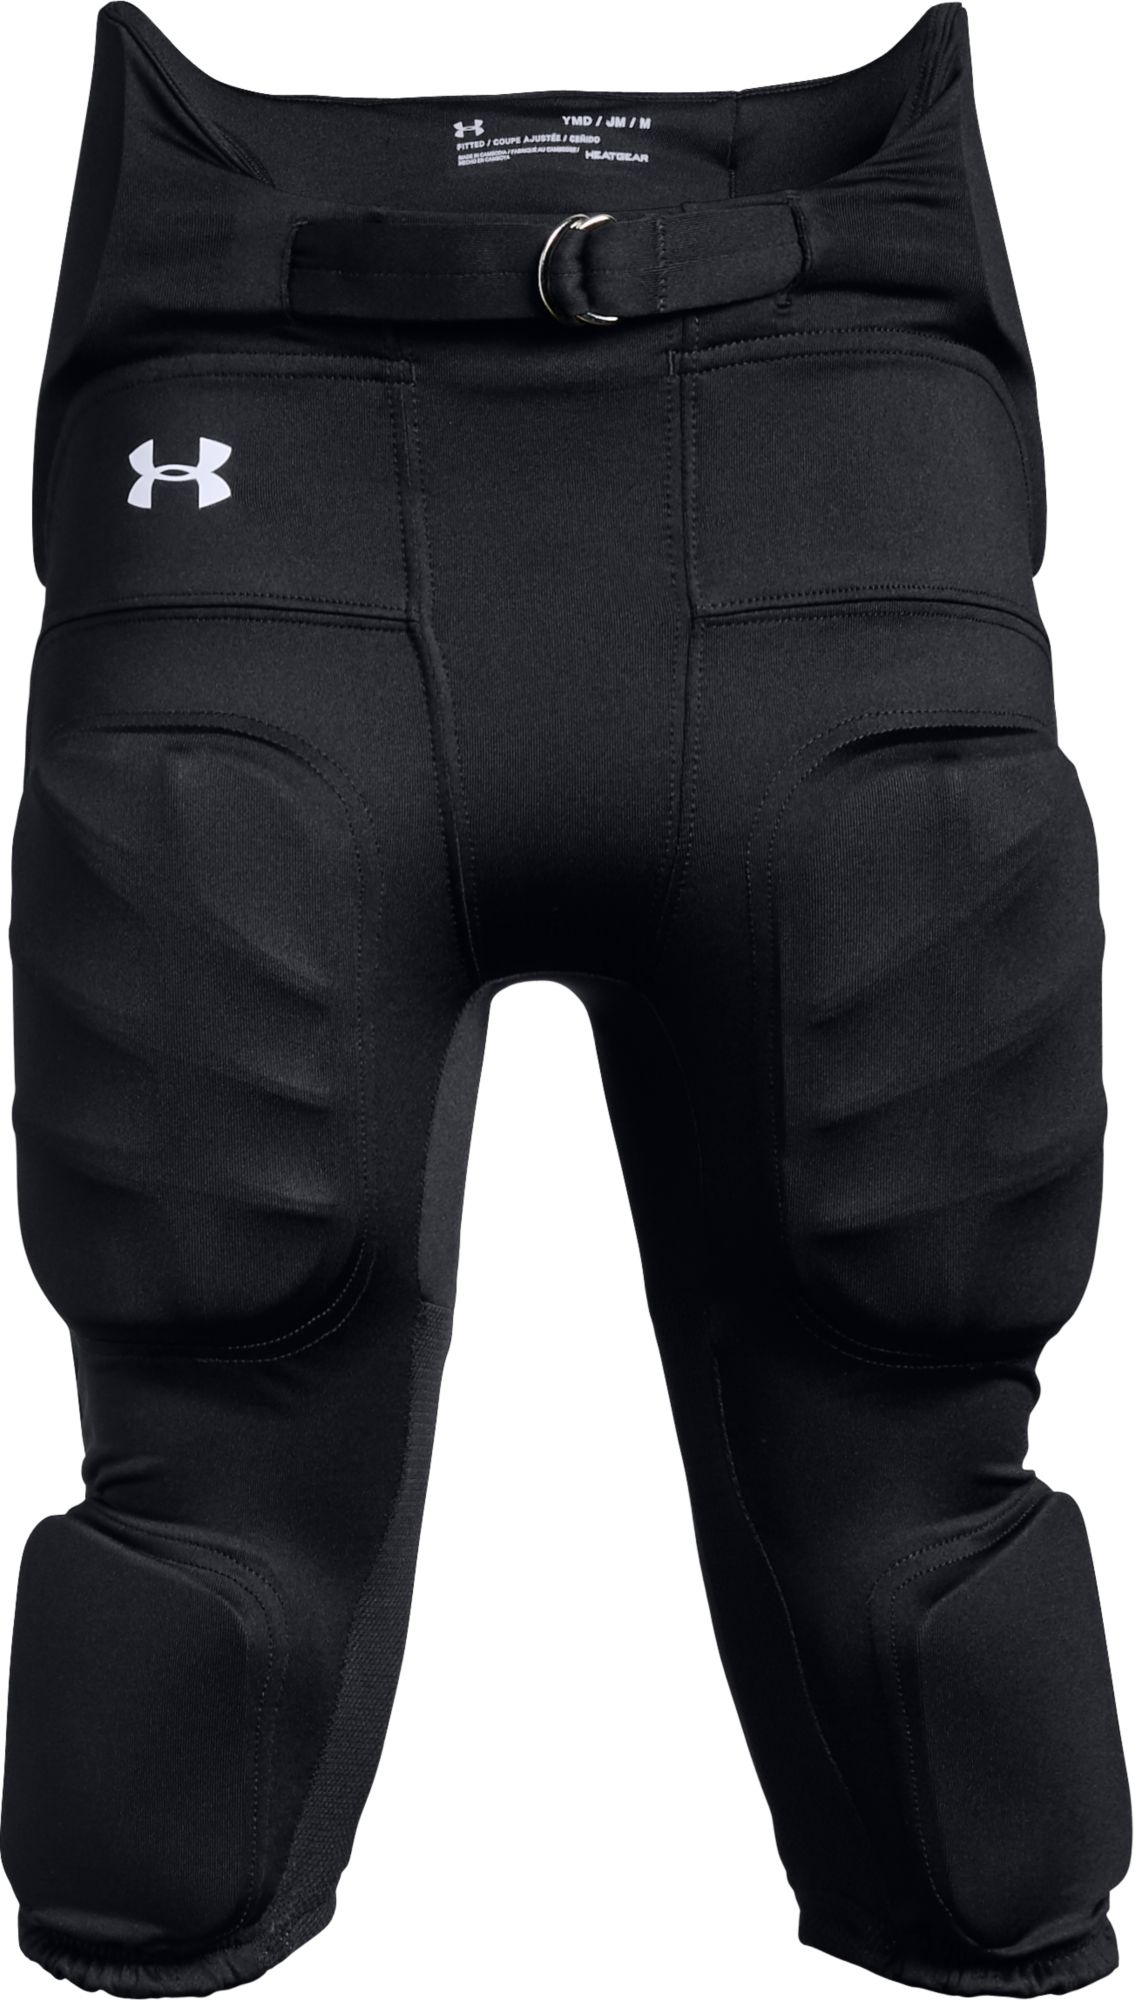 White Authentic Men's Football Pant UNDER ARMOUR NWT Size Large NEW 